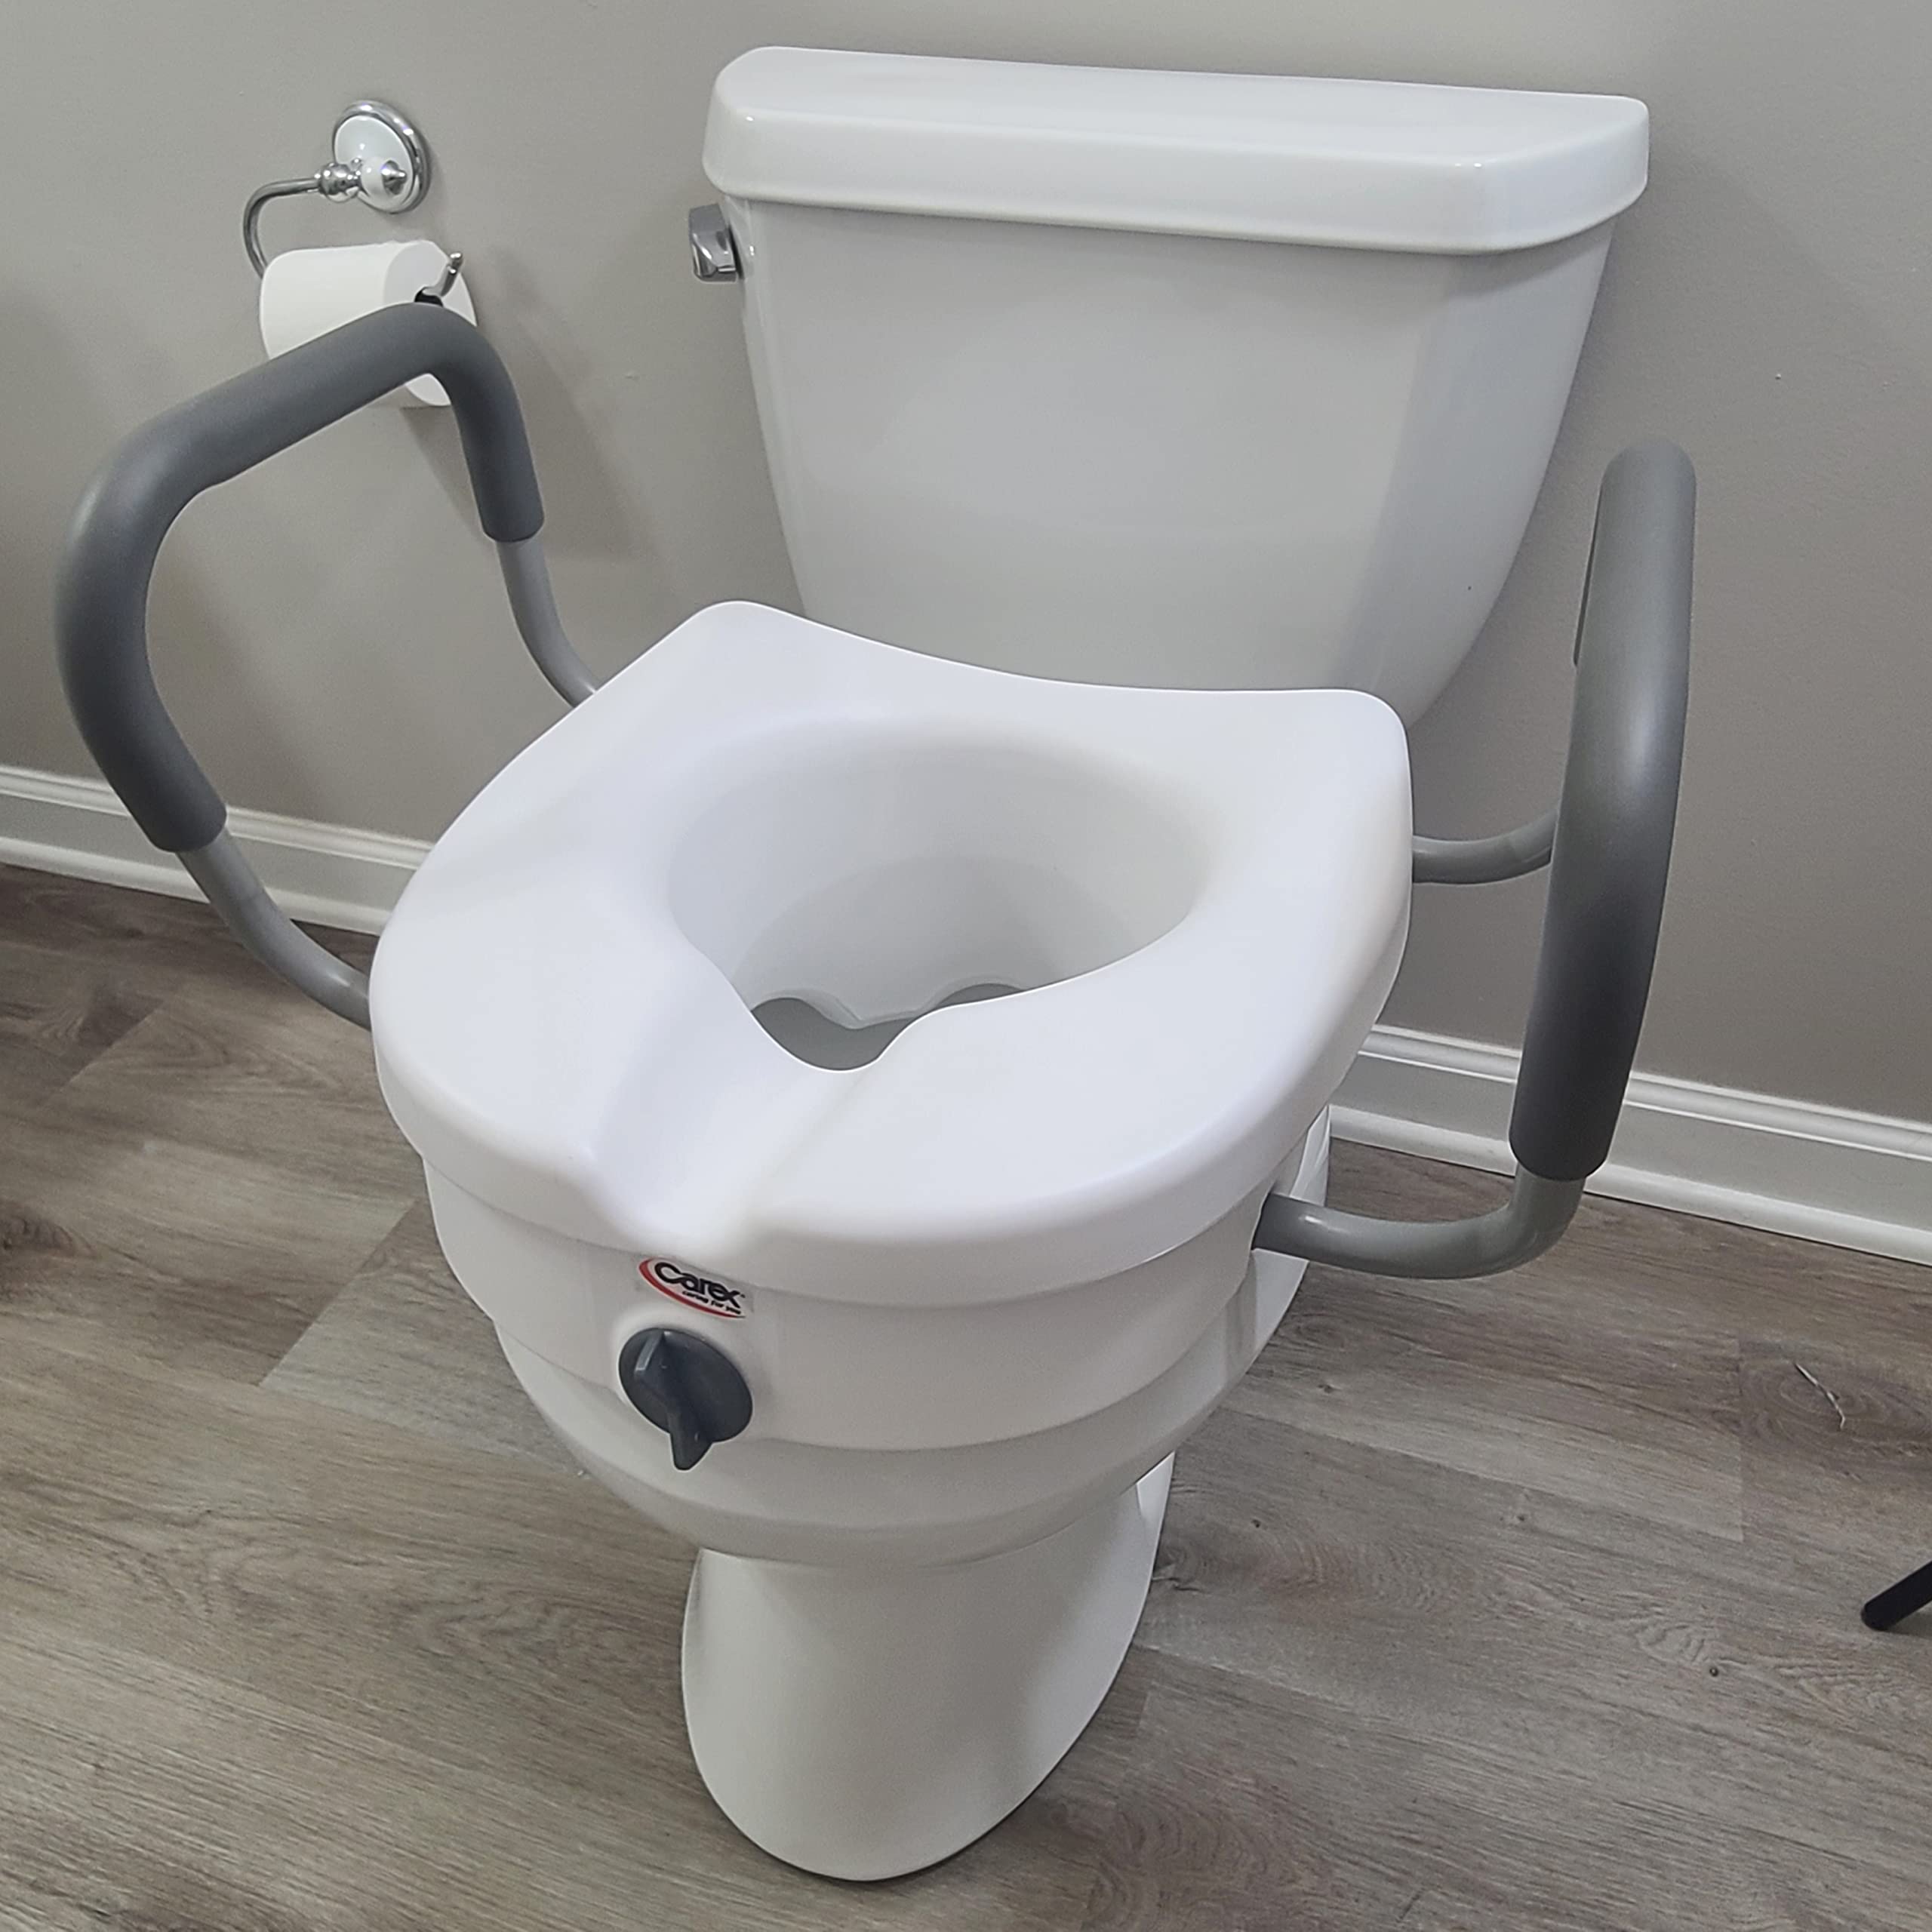 Carex EZ Lock Raised Toilet Seat with Handles, 5 Inch Elevated Handicap Toilet Seat Riser with Arms, Fits Most Toilets